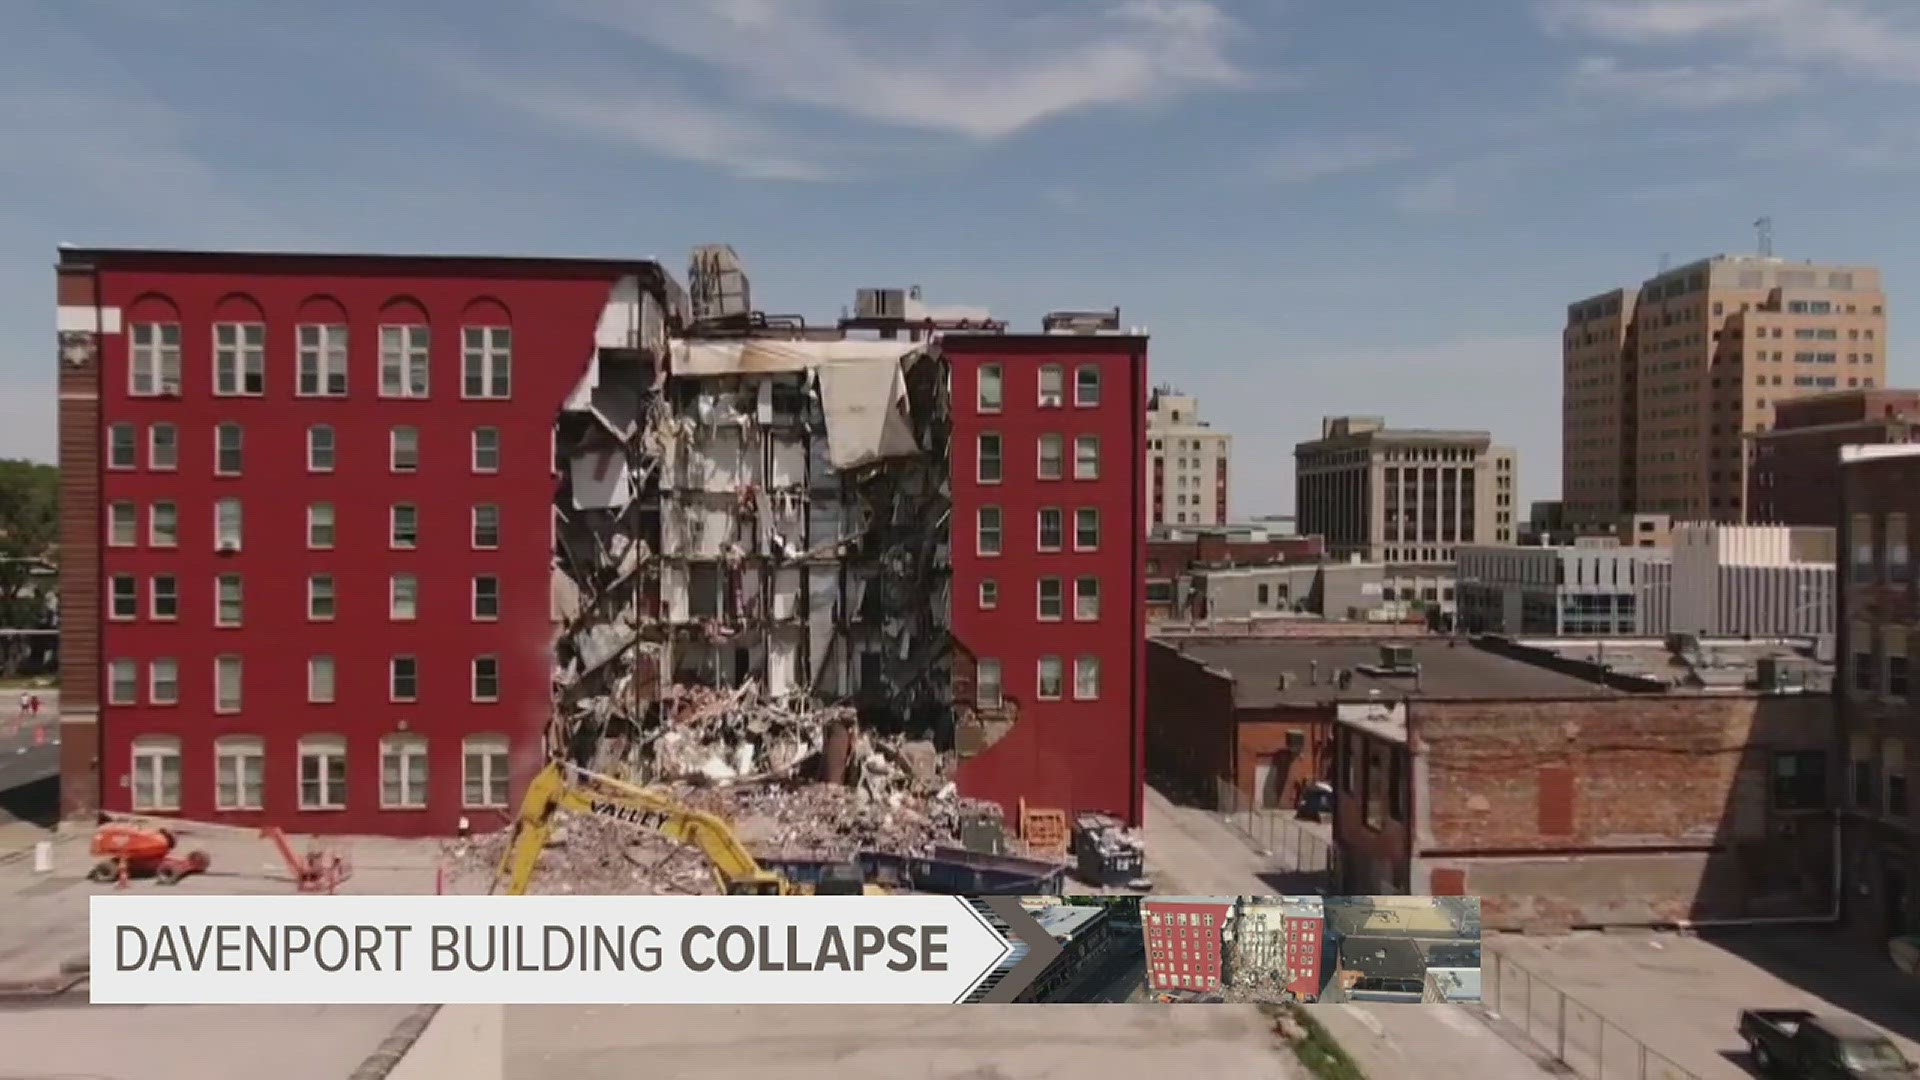 Linnea Hoover was a resident in the former Davenport building prior to the collapse, and shares how this report